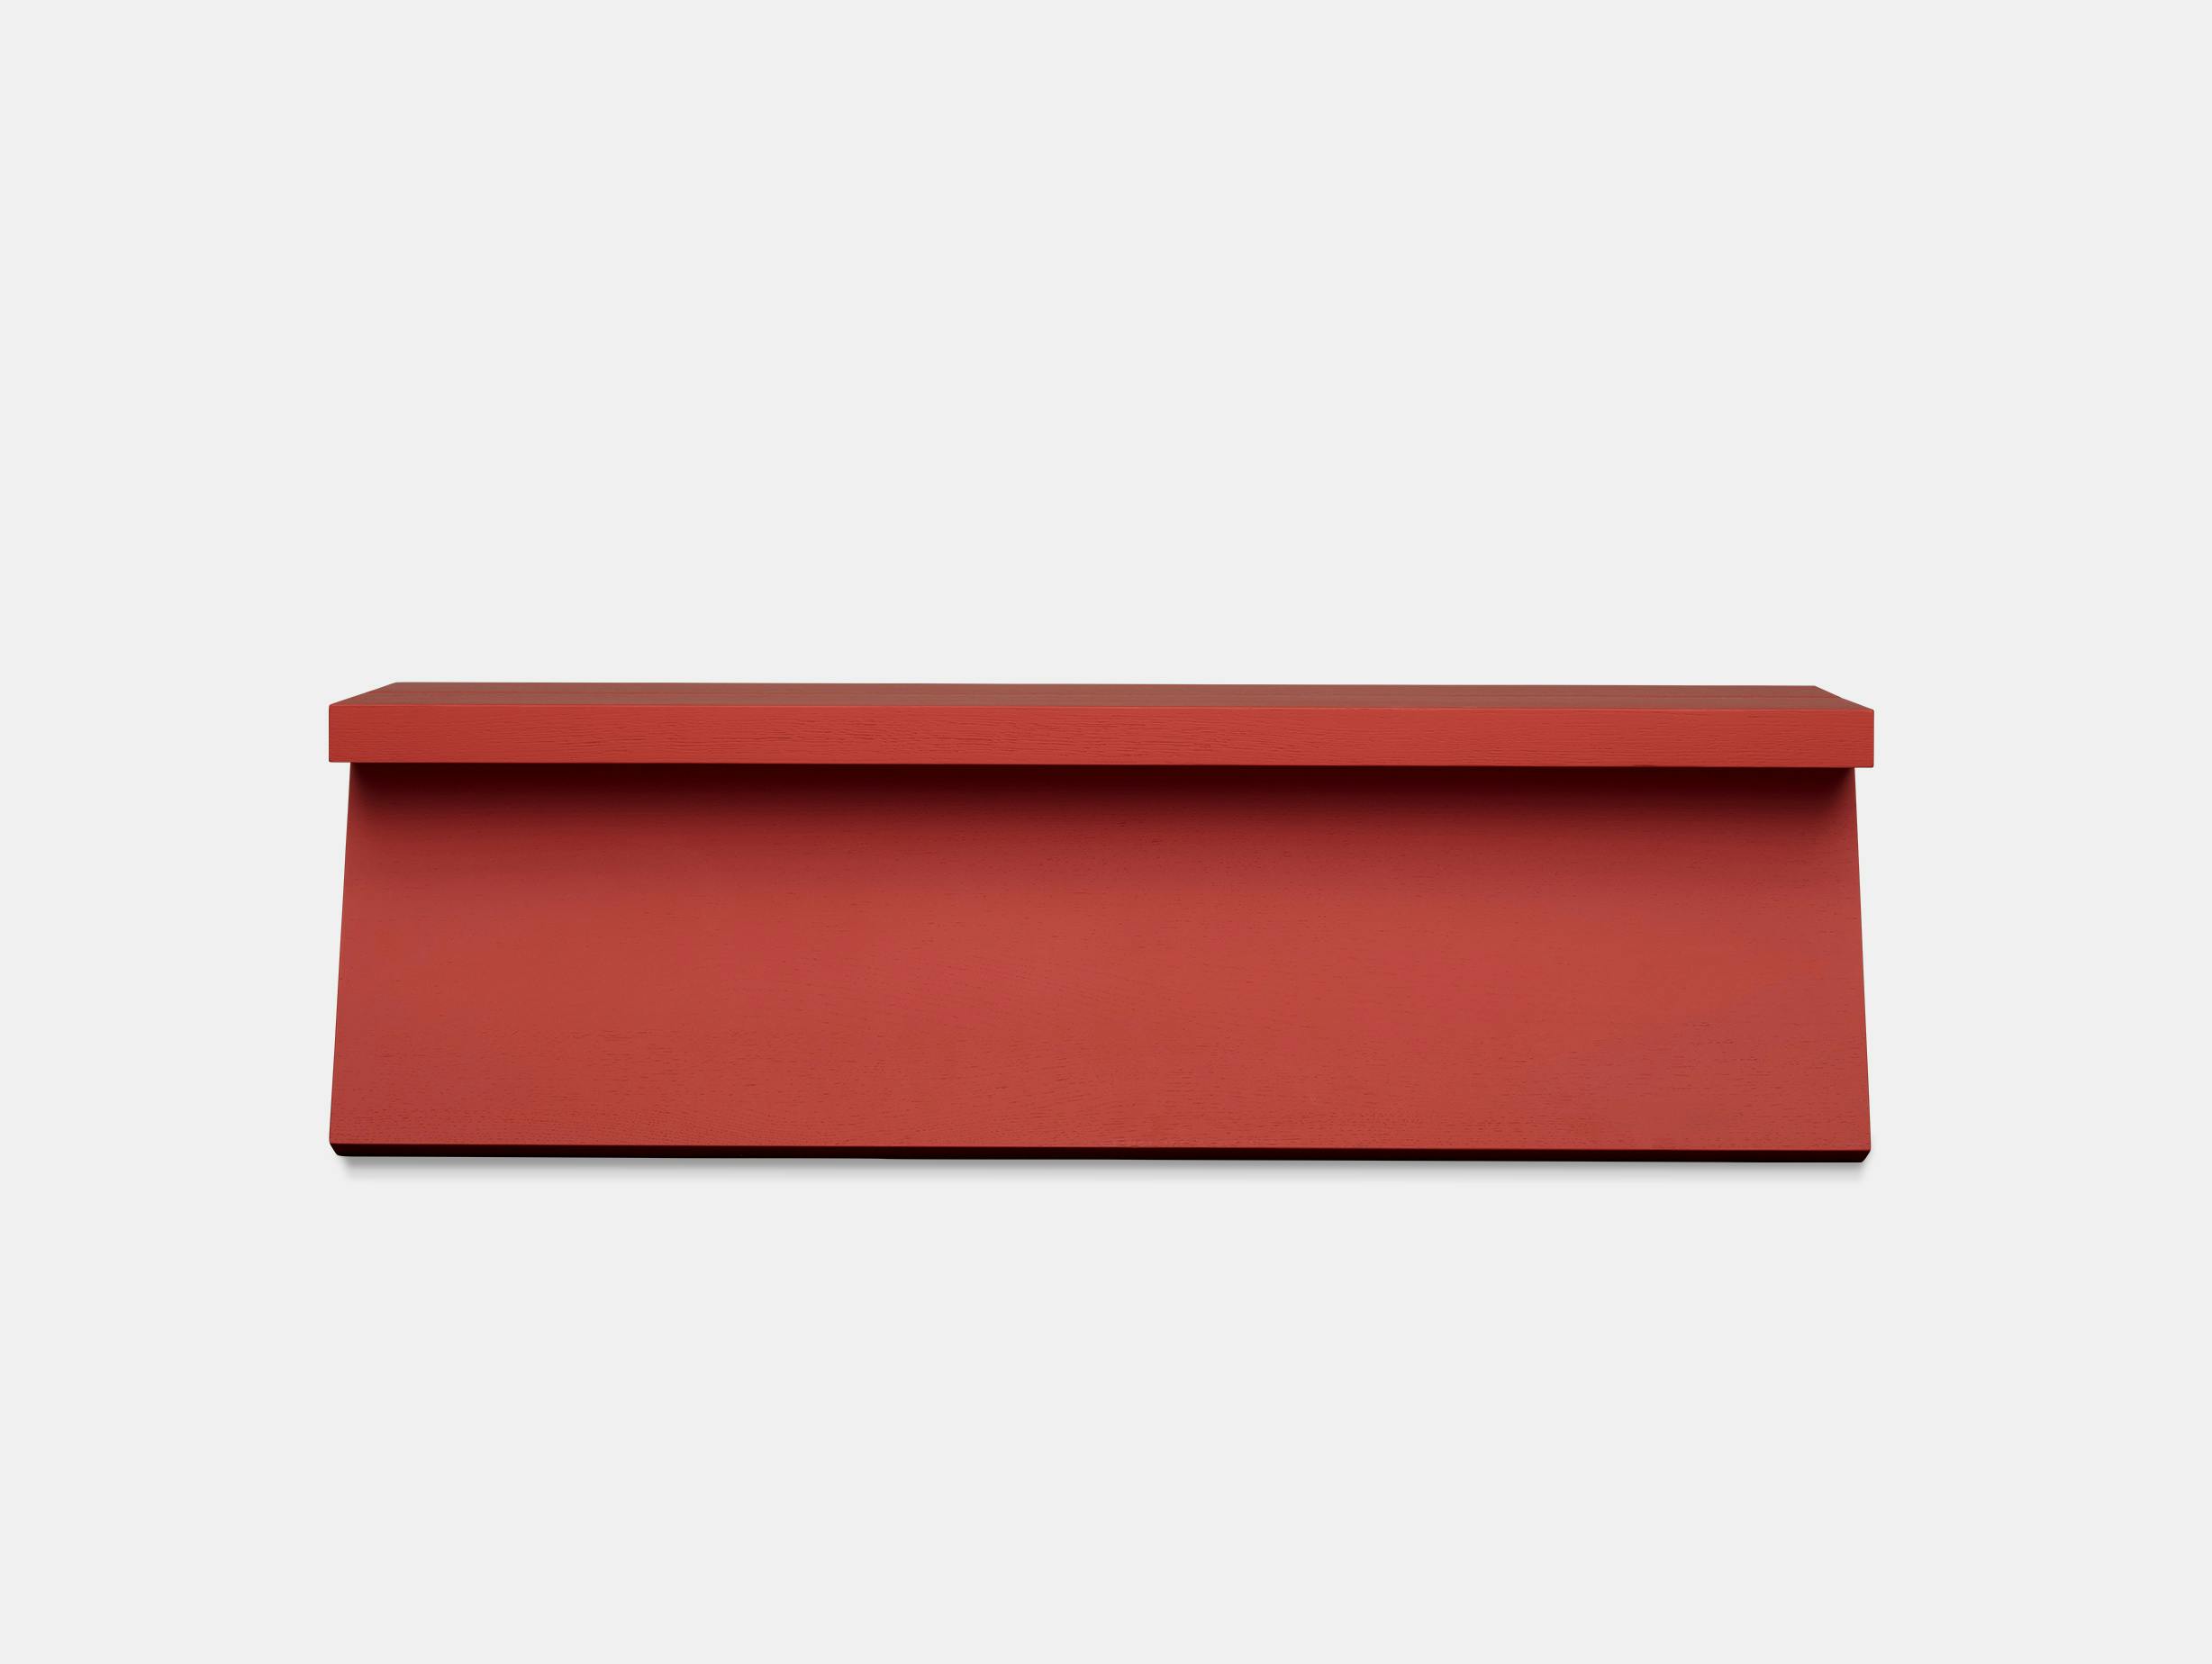 Fogia supersolid object 3 red bench 2